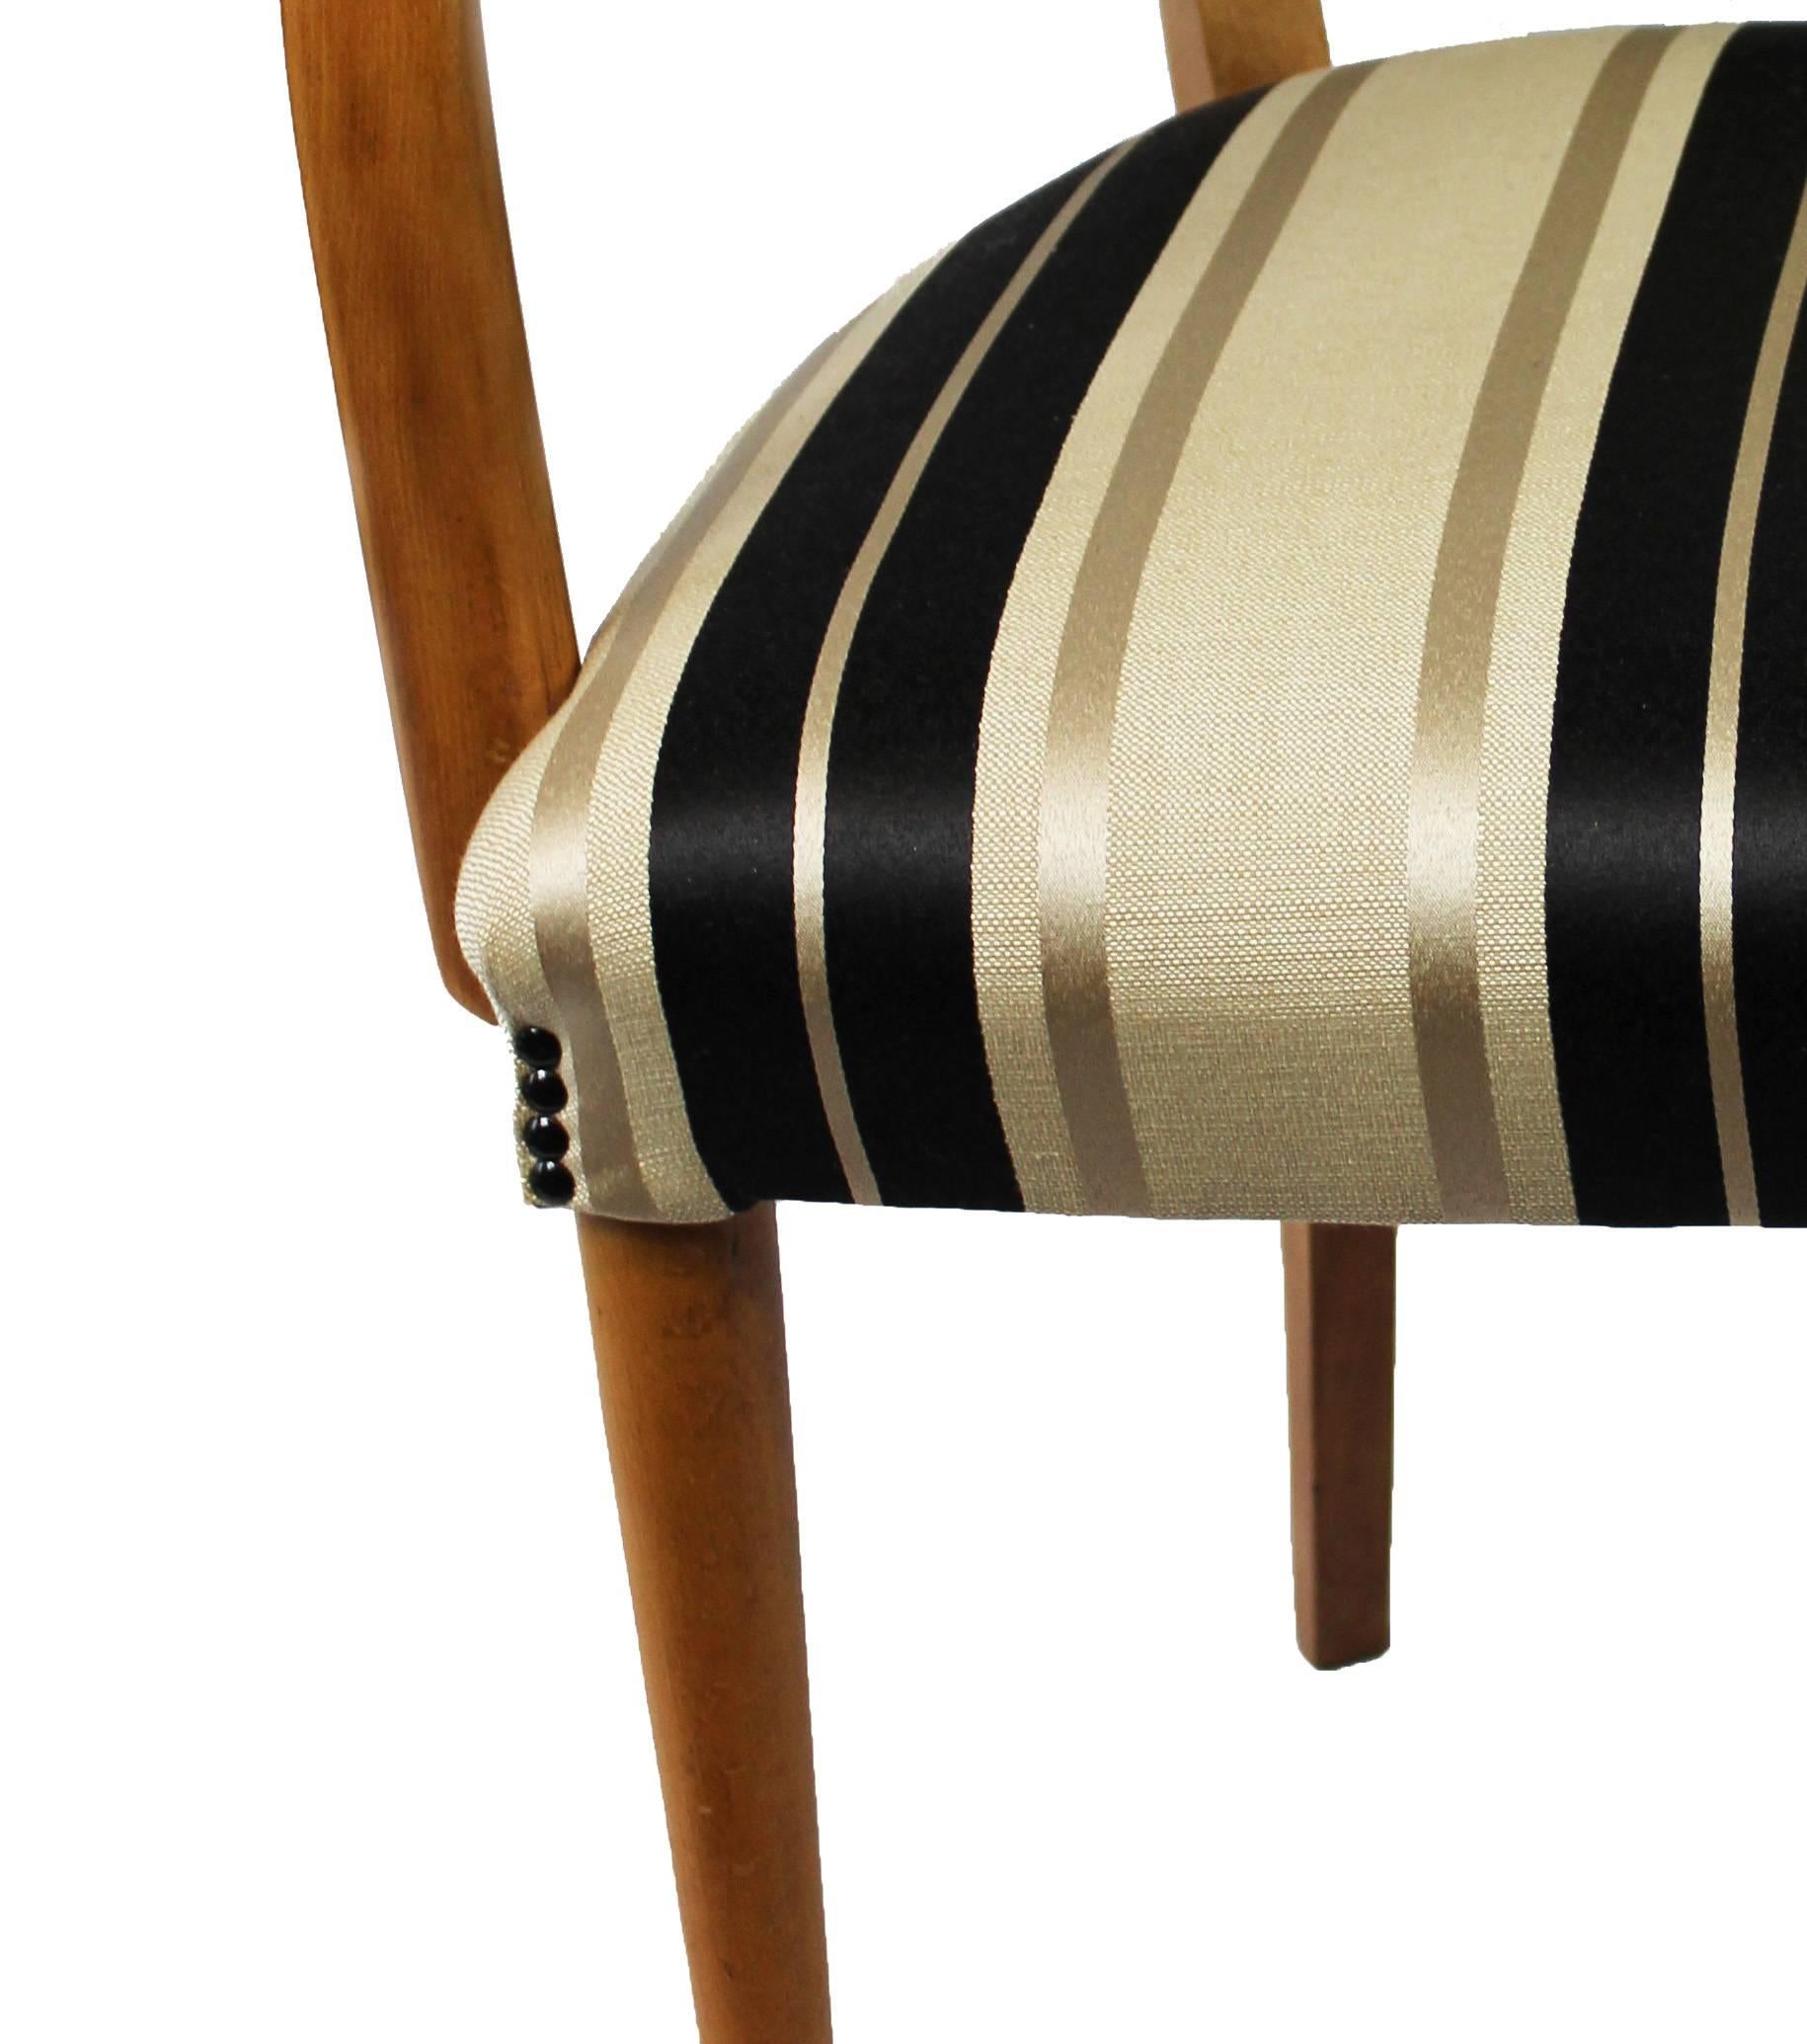 Desk chair made of olive wood and restored cushion in striped Italian jacquard. Made in Italy, circa 1940s.